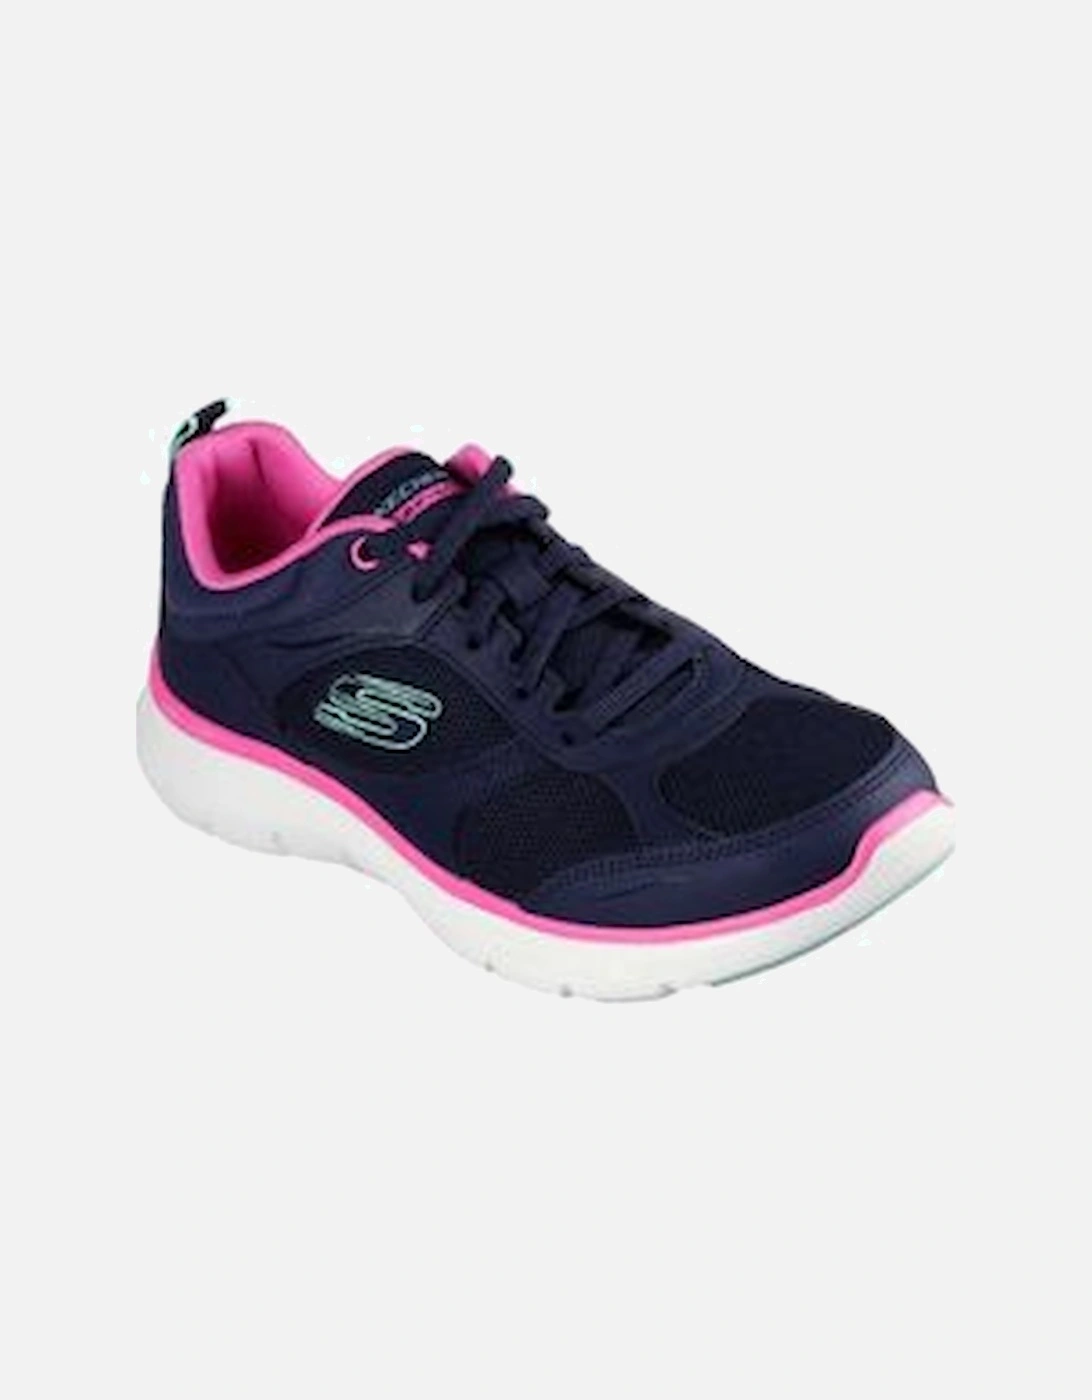 Flex Appeal 5.0 Fresh Touch 150202 NVHP navy hot pink, 2 of 1